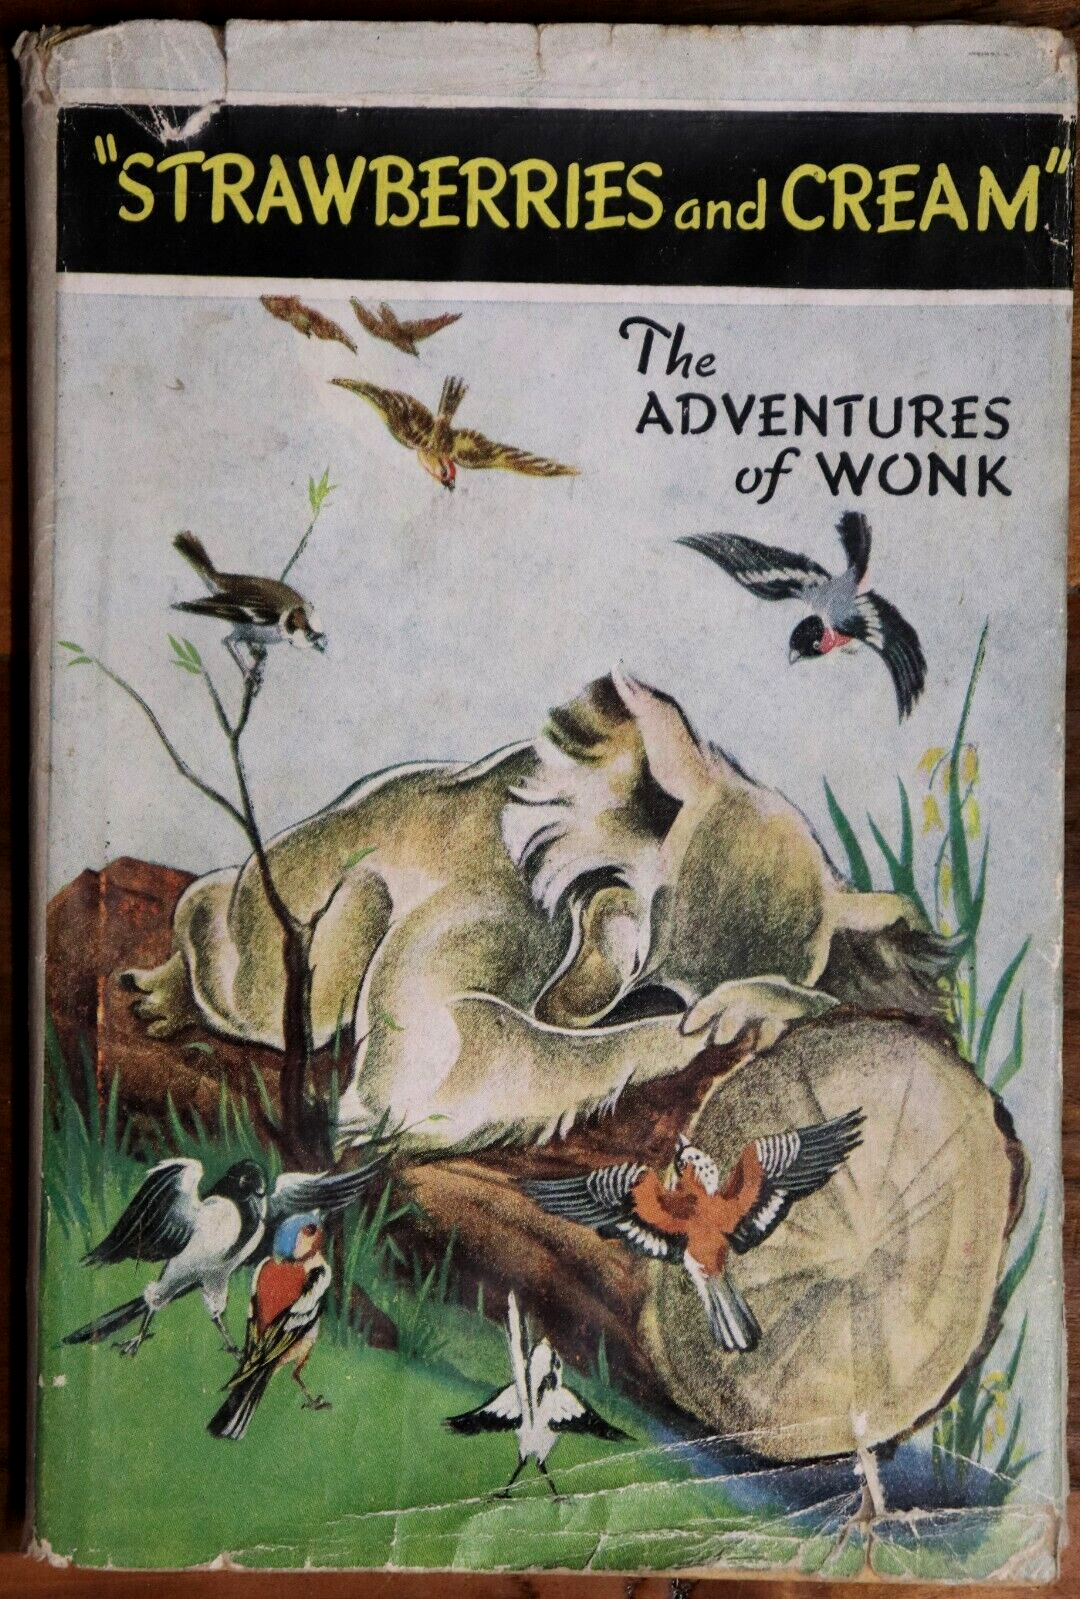 1948 The Adventures Of Wonk by Muriel Levy Antique Australian Fiction Book